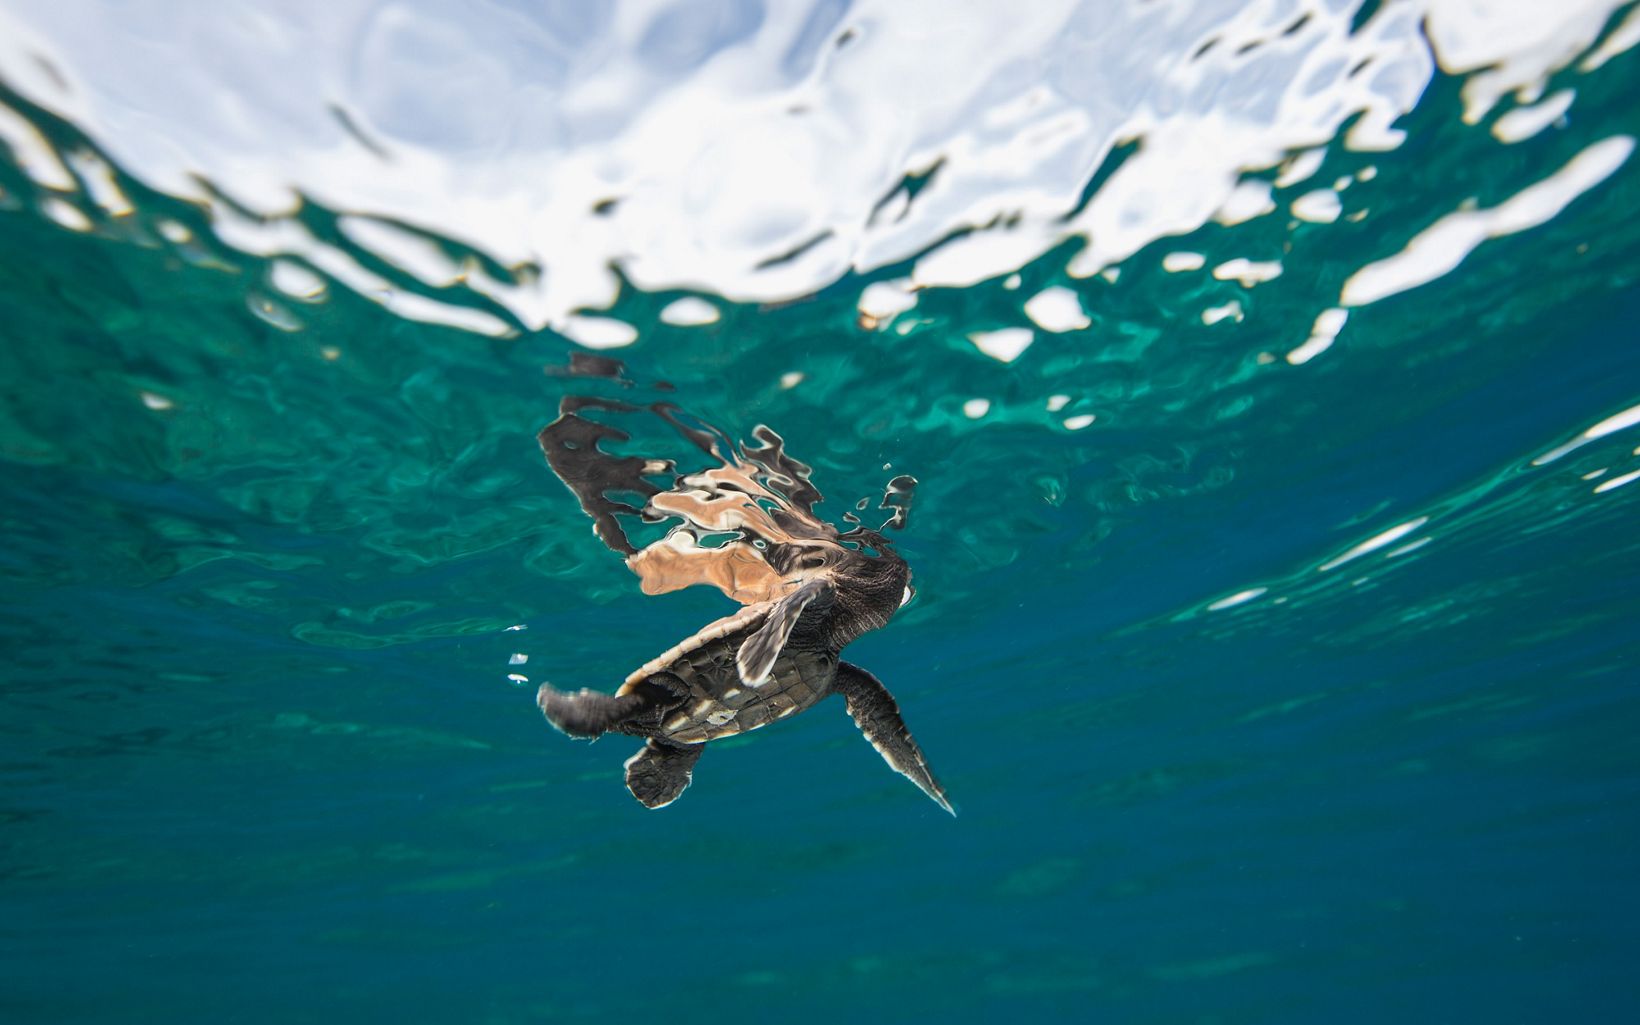 A hawksbill hatchling takes to the sea. © Tim Calver